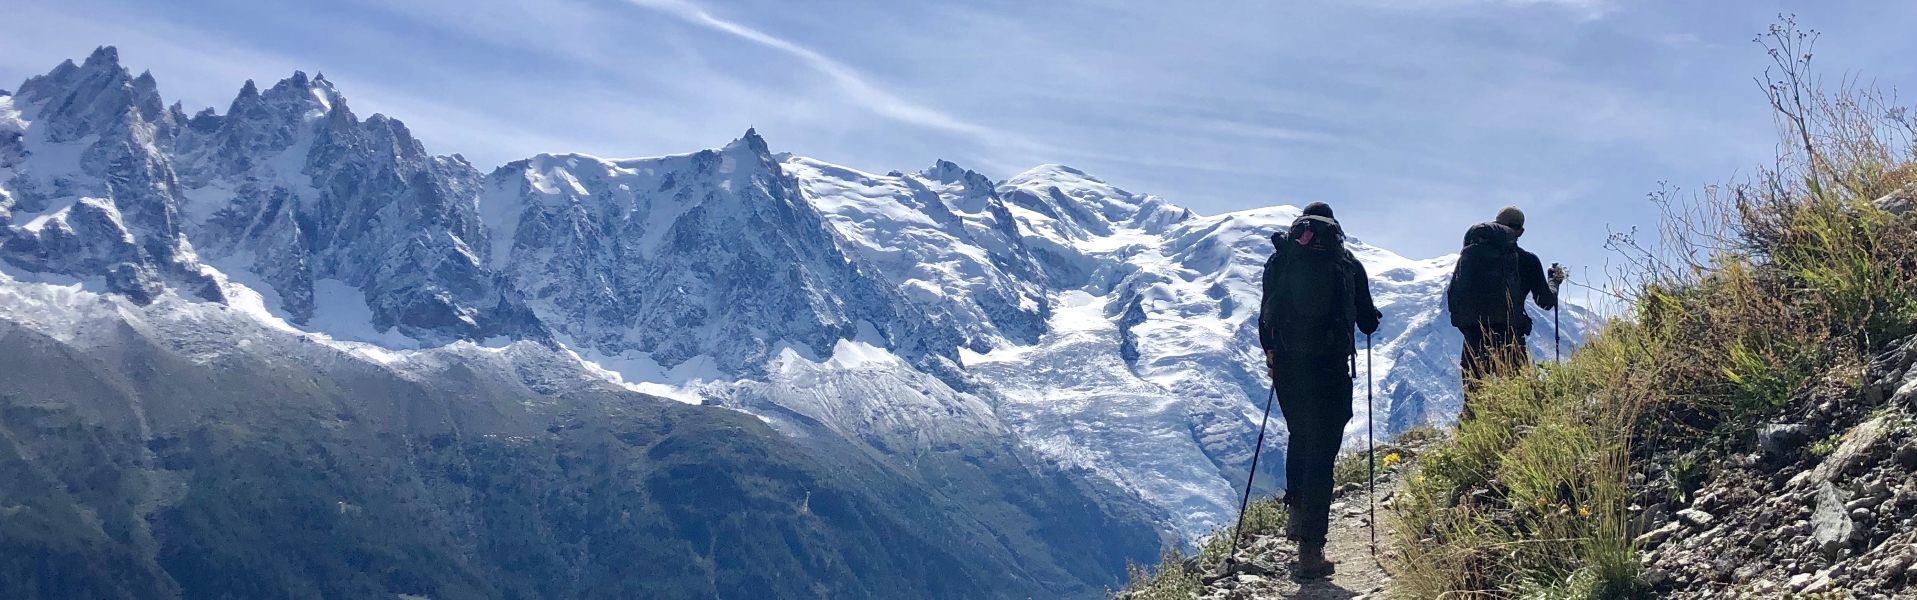 6 Reasons Why You Should Hike the Tour Du Mont Blanc - The Trek